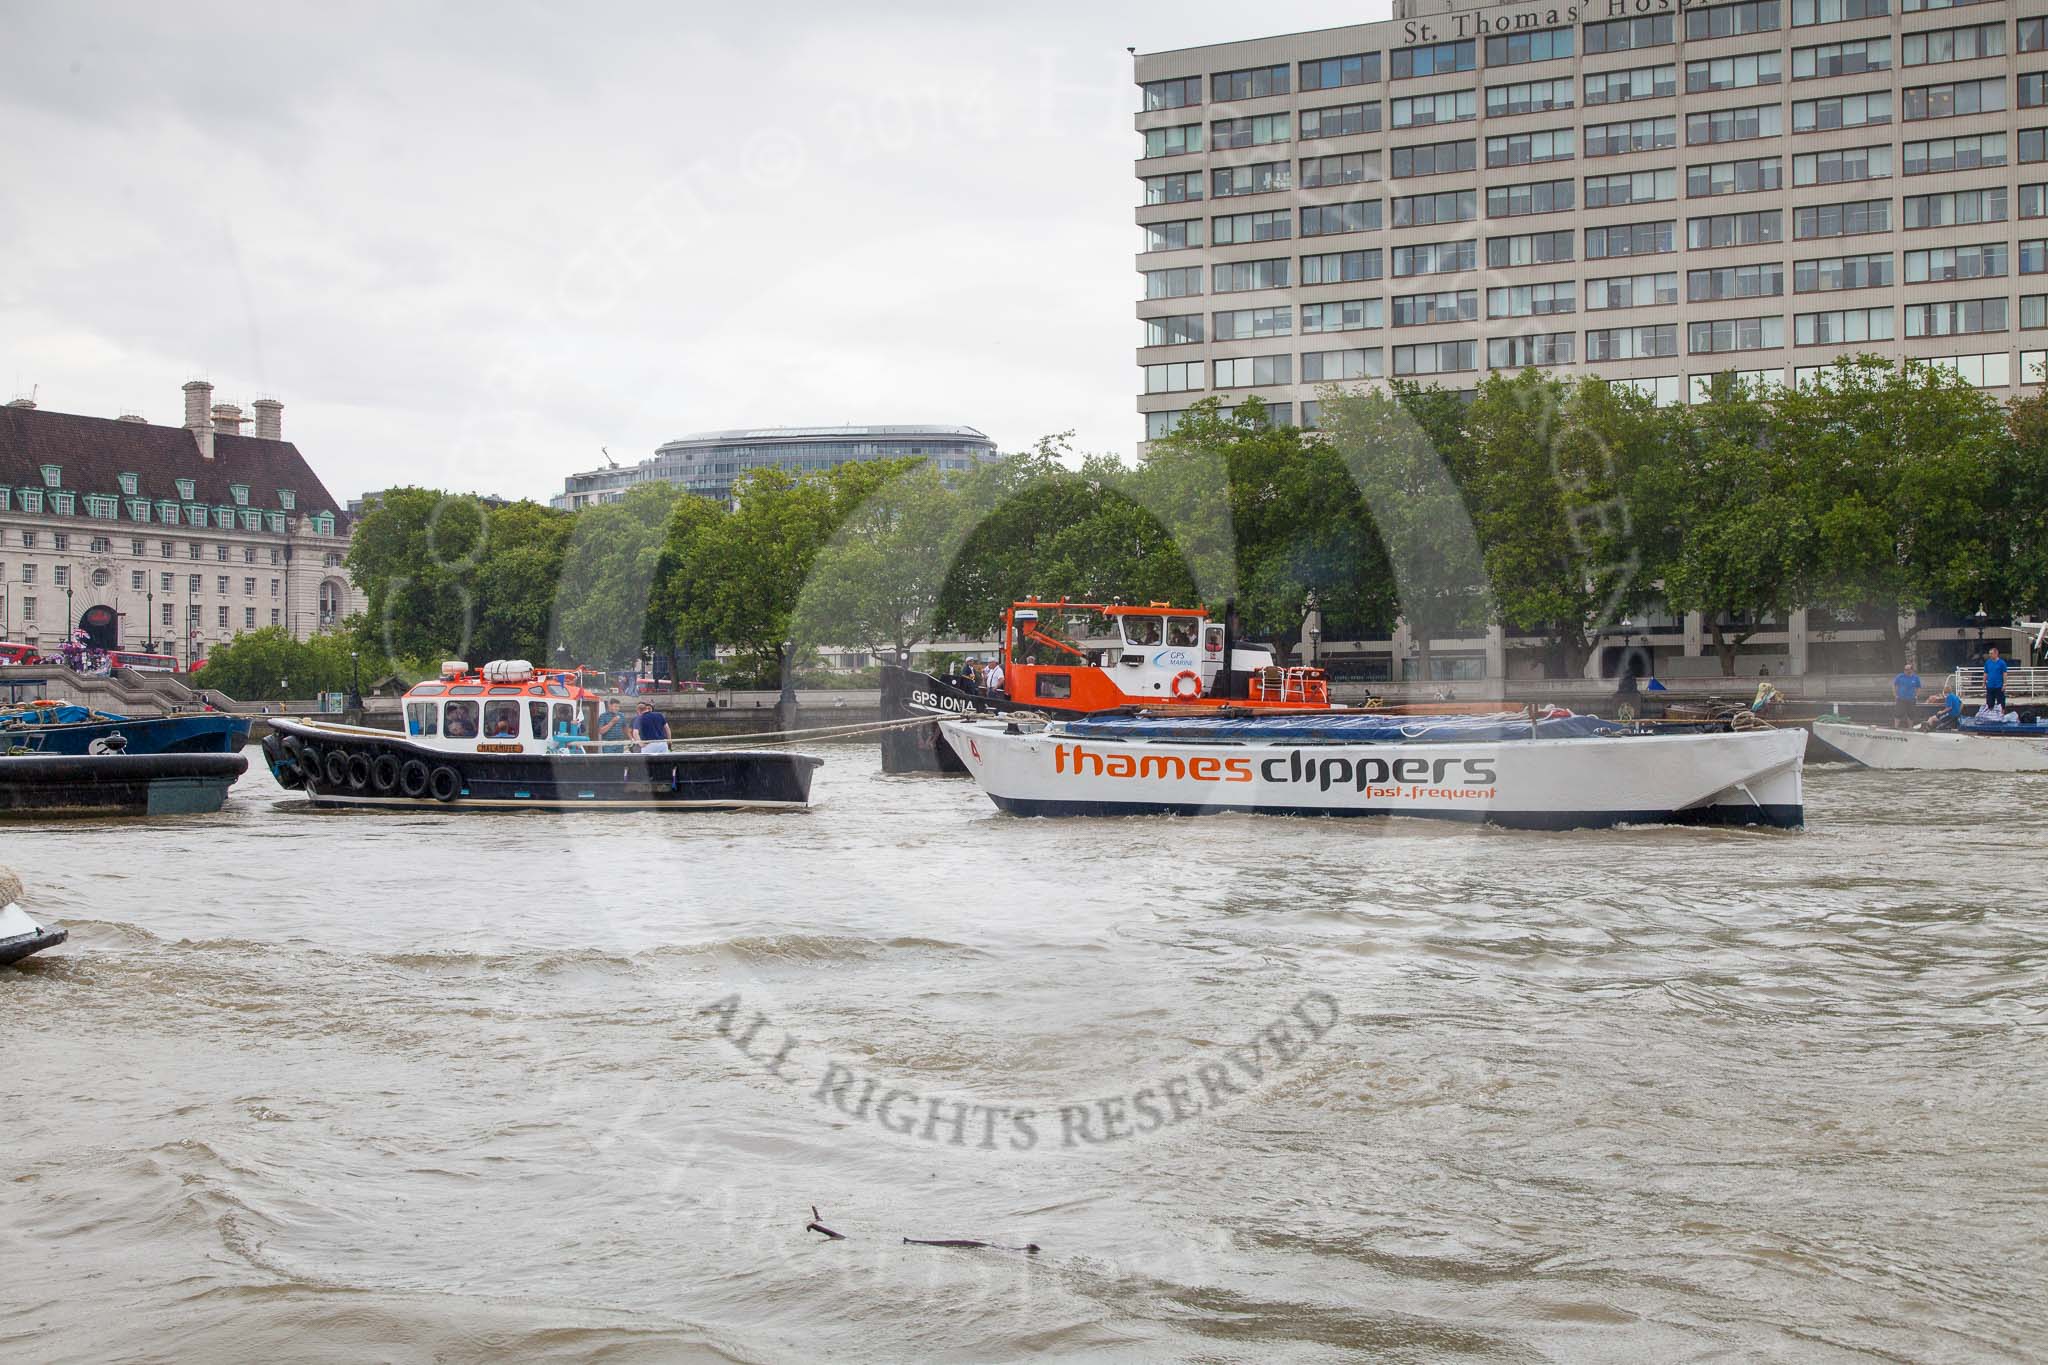 TOW River Thames Barge Driving Race 2014.
River Thames between Greenwich and Westminster,
London,

United Kingdom,
on 28 June 2014 at 14:40, image #436